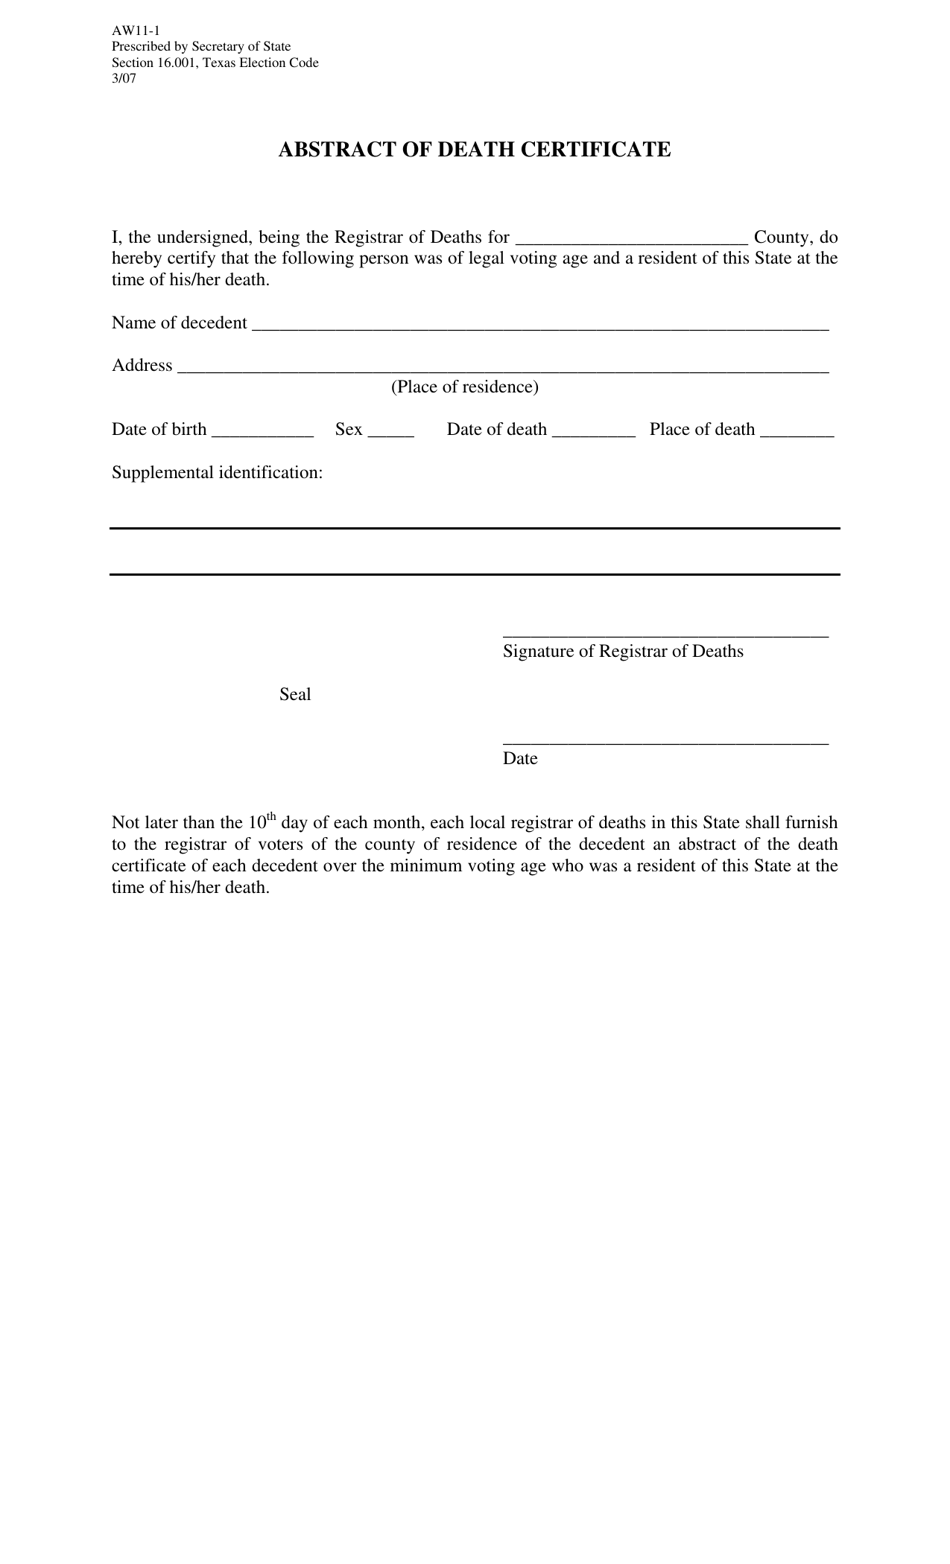 Form AW11-1 Abstract of Death Certificate - Texas, Page 1